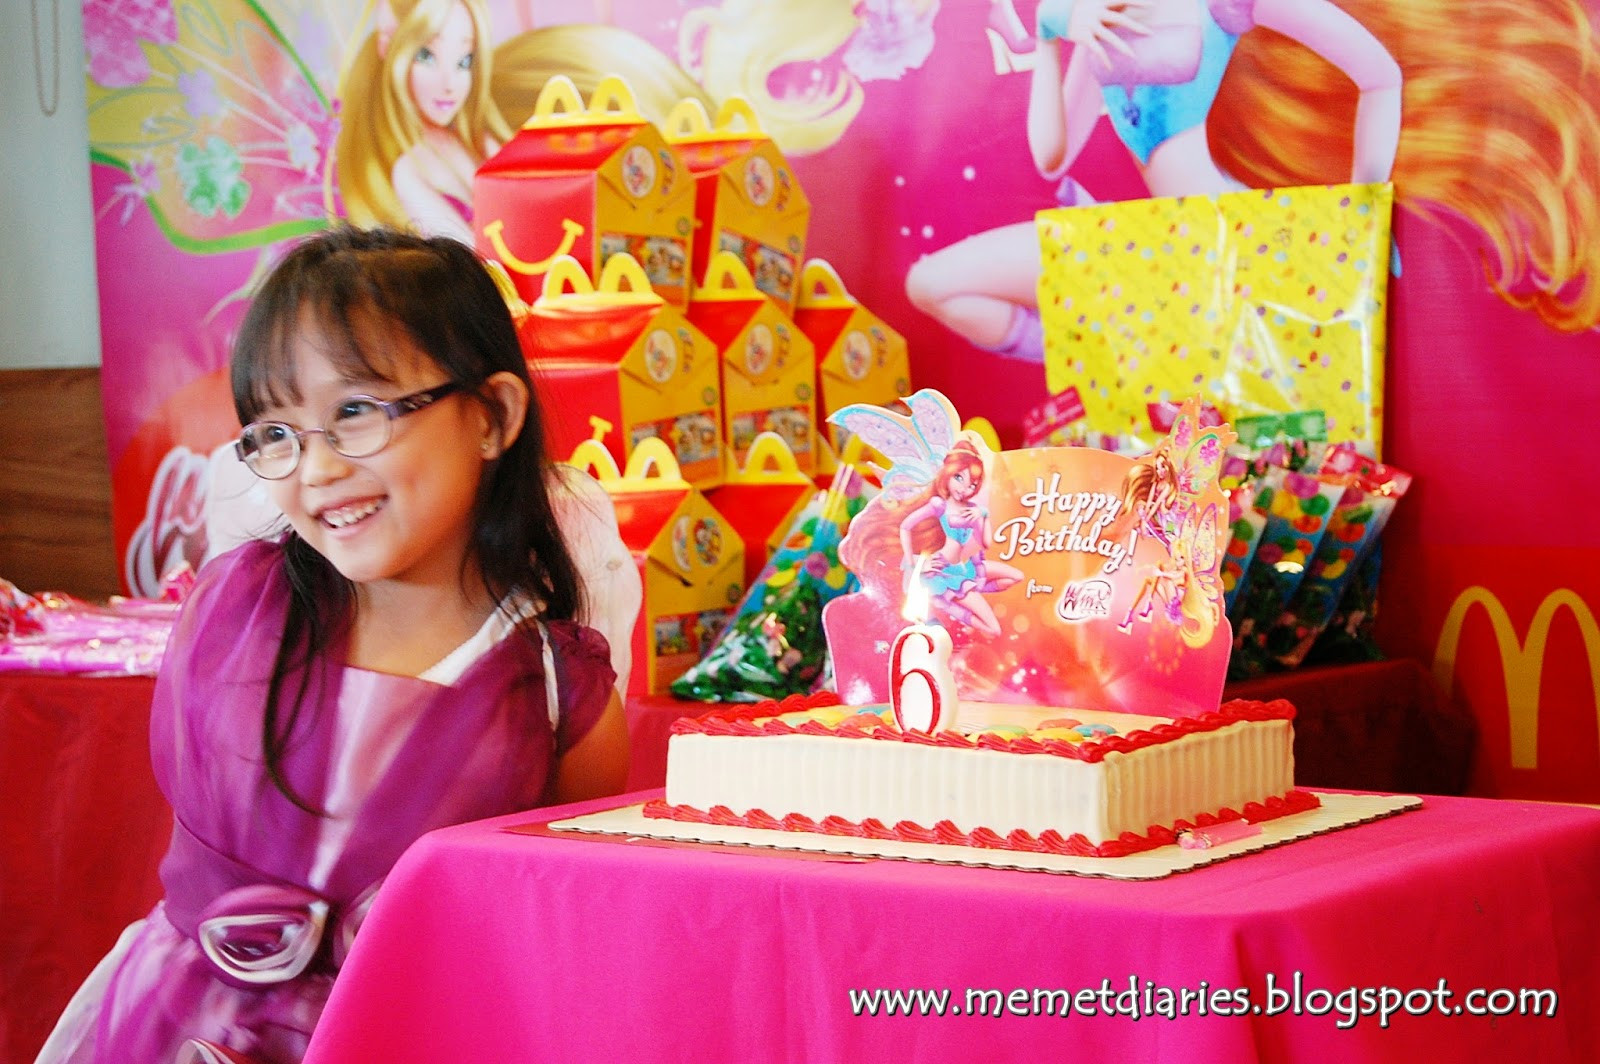 Mcdonalds Birthday Party
 Colourful Kid Party at McDonald s The Memet Diaries